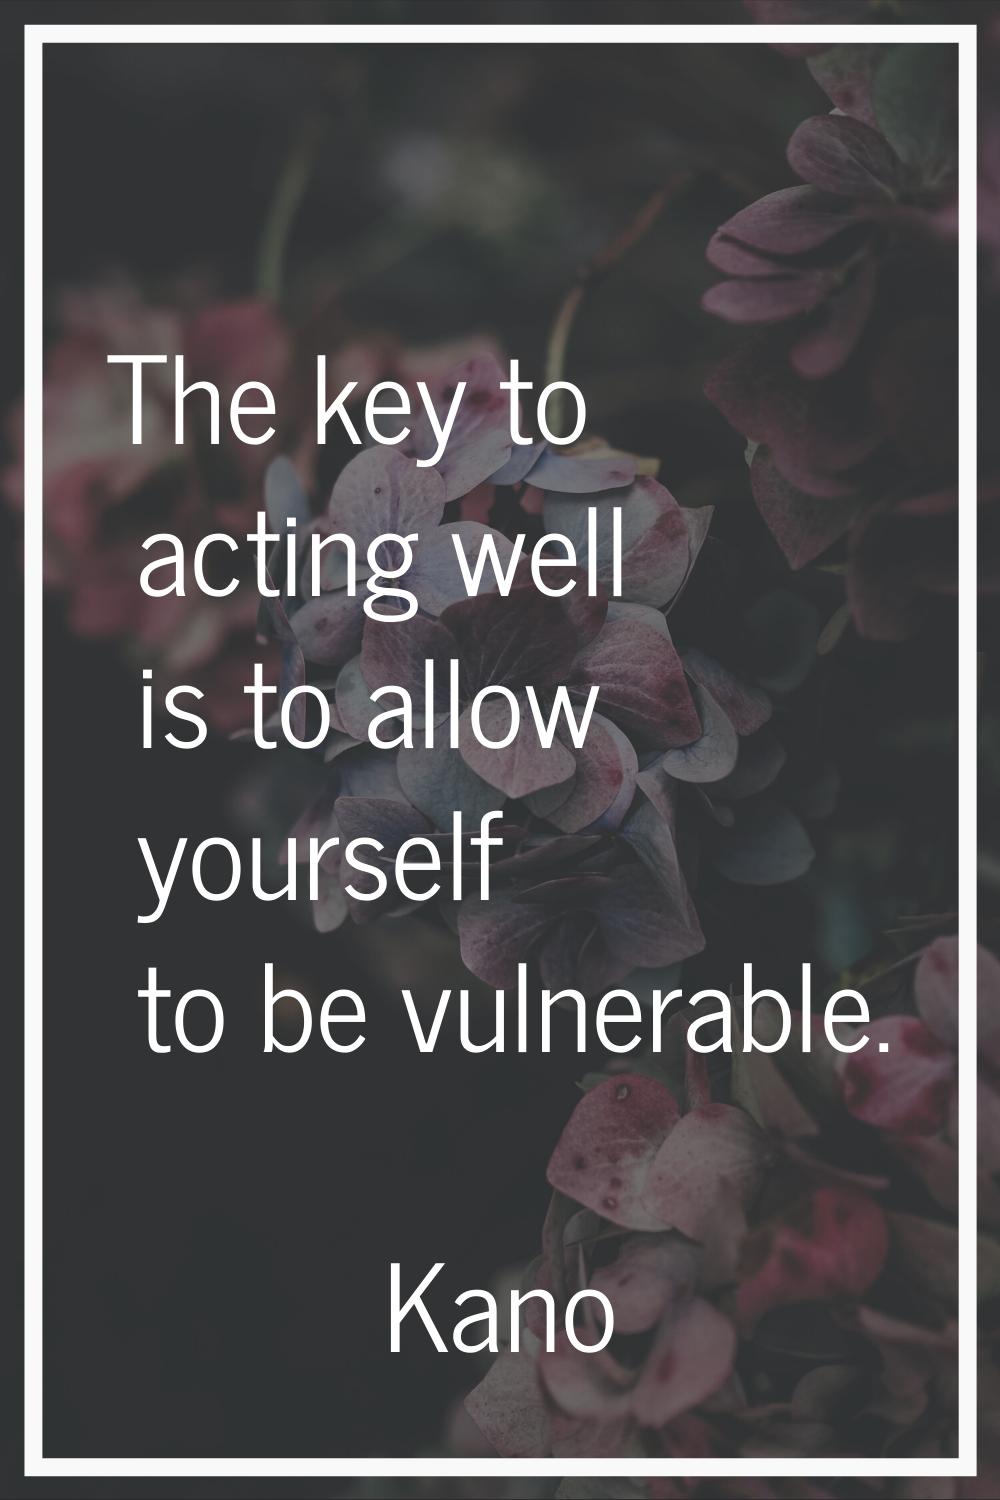 The key to acting well is to allow yourself to be vulnerable.